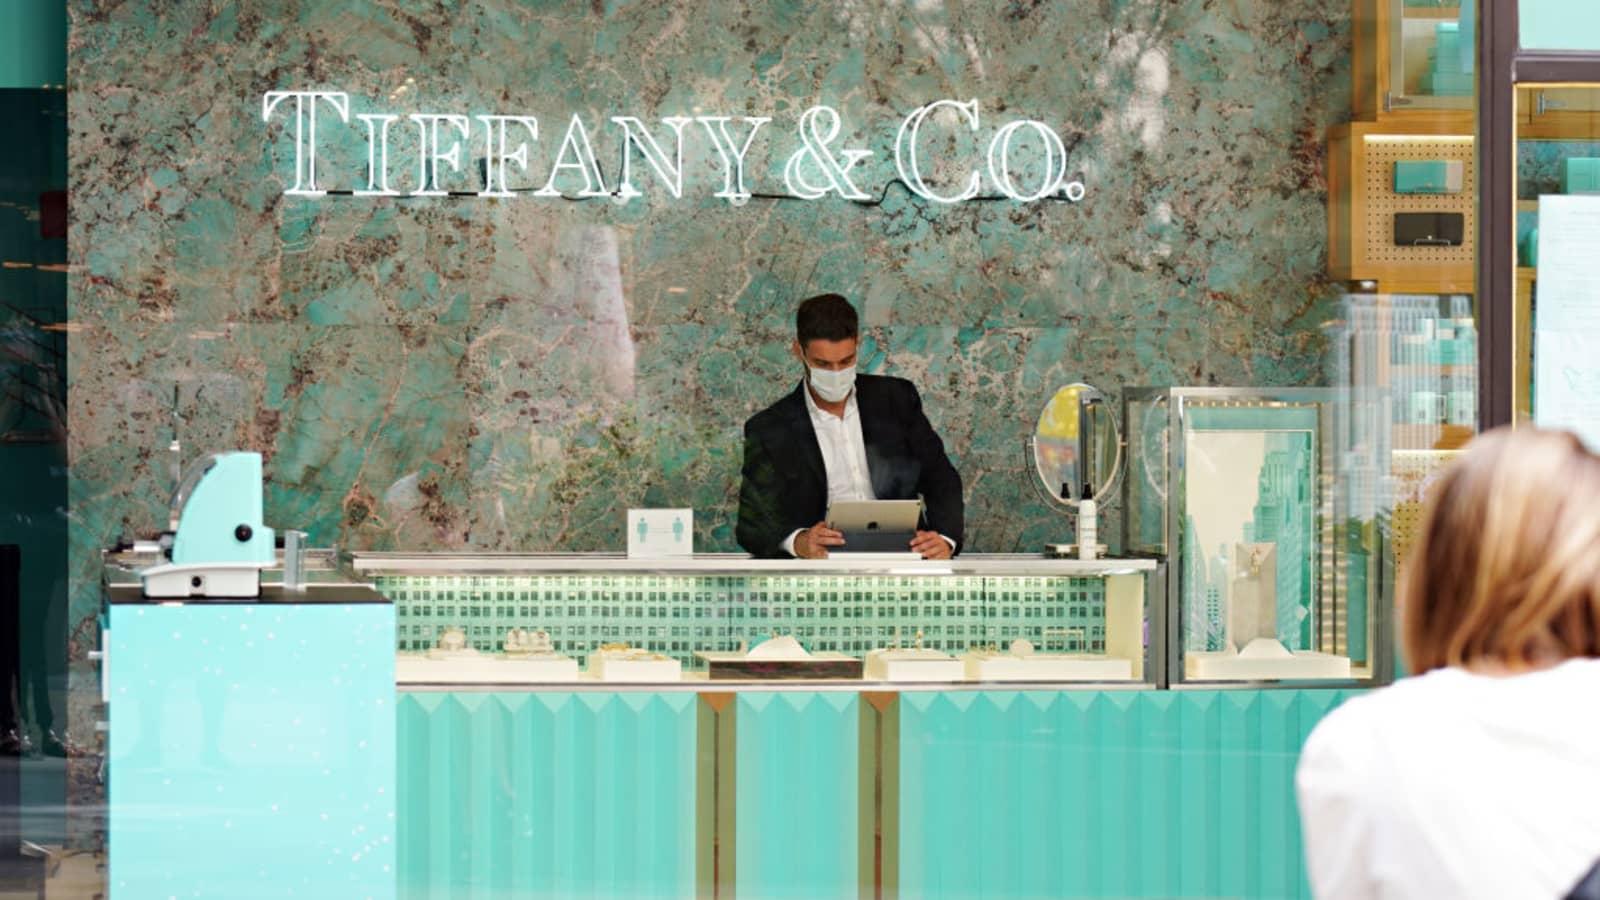 LVMH Acquired Tiffany & Co. for $15.8 Billion — And Now They're